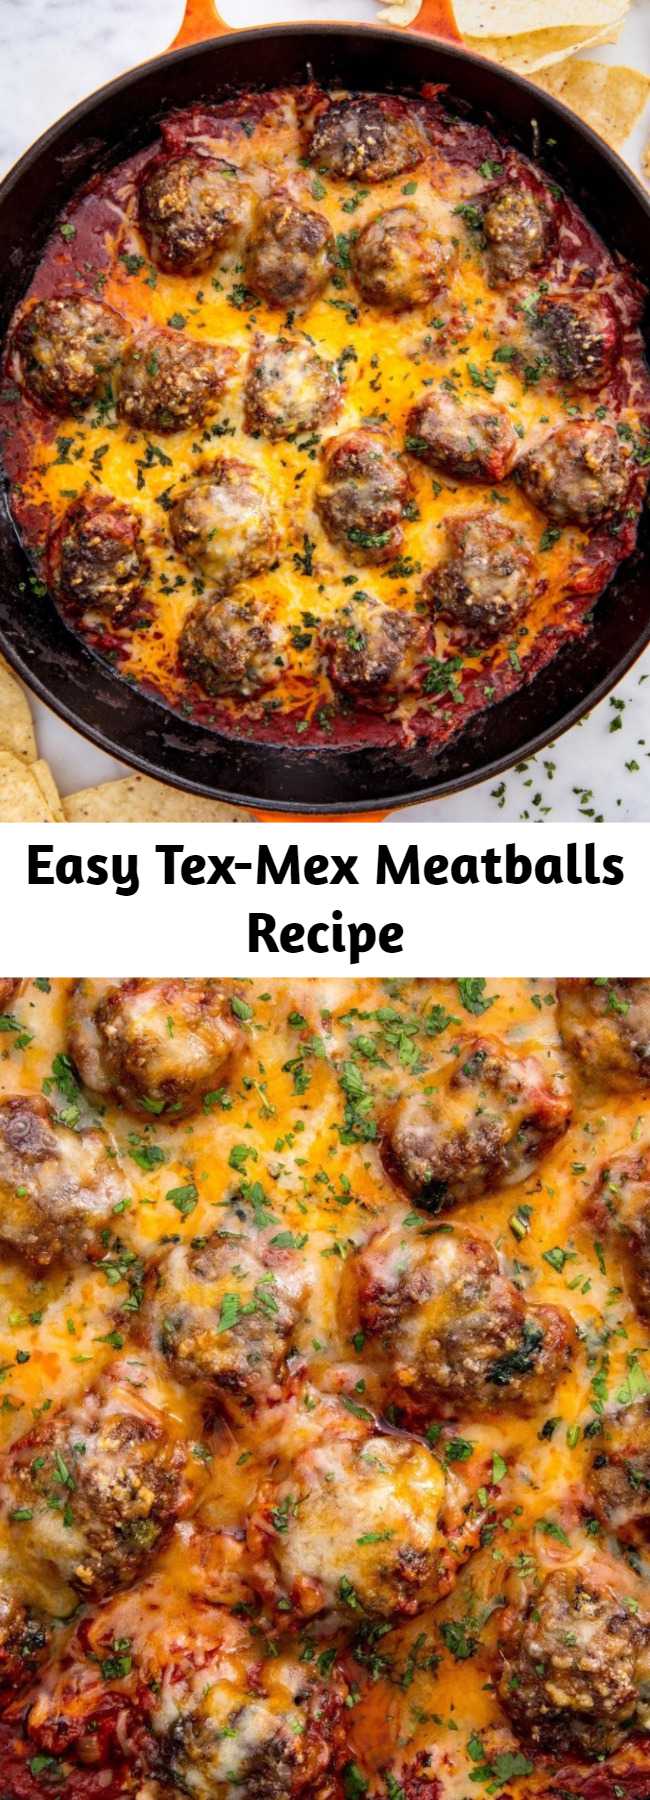 Easy Tex-Mex Meatballs Recipe - Kick up the Italian favorite with chipotle and spices. Pro tip: These meatballs make a killer sub. Throw them on a hero roll with extra sauce and melt some cheddar on top. #italianrecipes #mexicanrecipes #meatball #easyrecipes #lowcarbrecipes